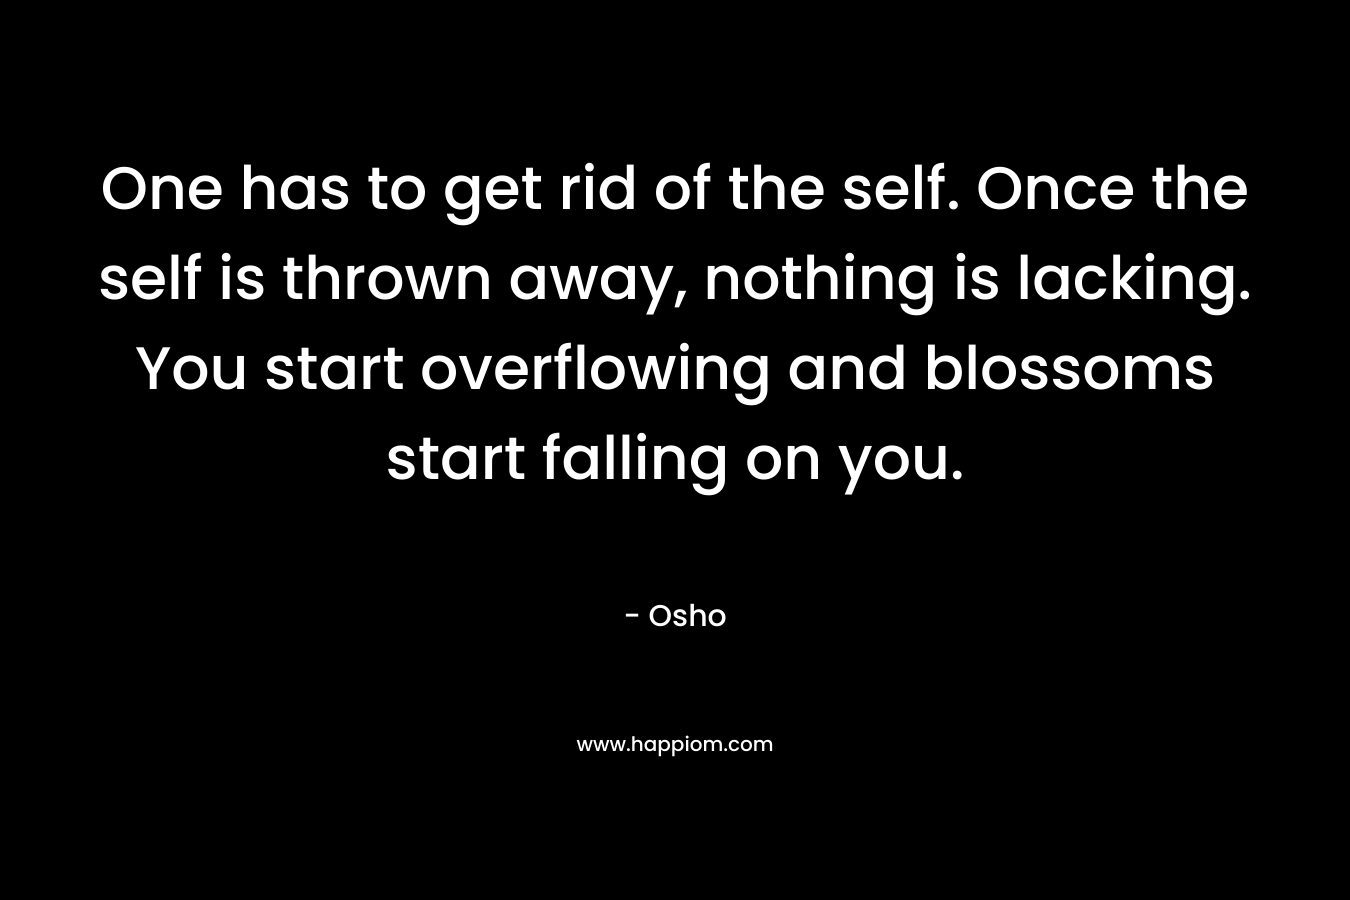 One has to get rid of the self. Once the self is thrown away, nothing is lacking. You start overflowing and blossoms start falling on you. – Osho